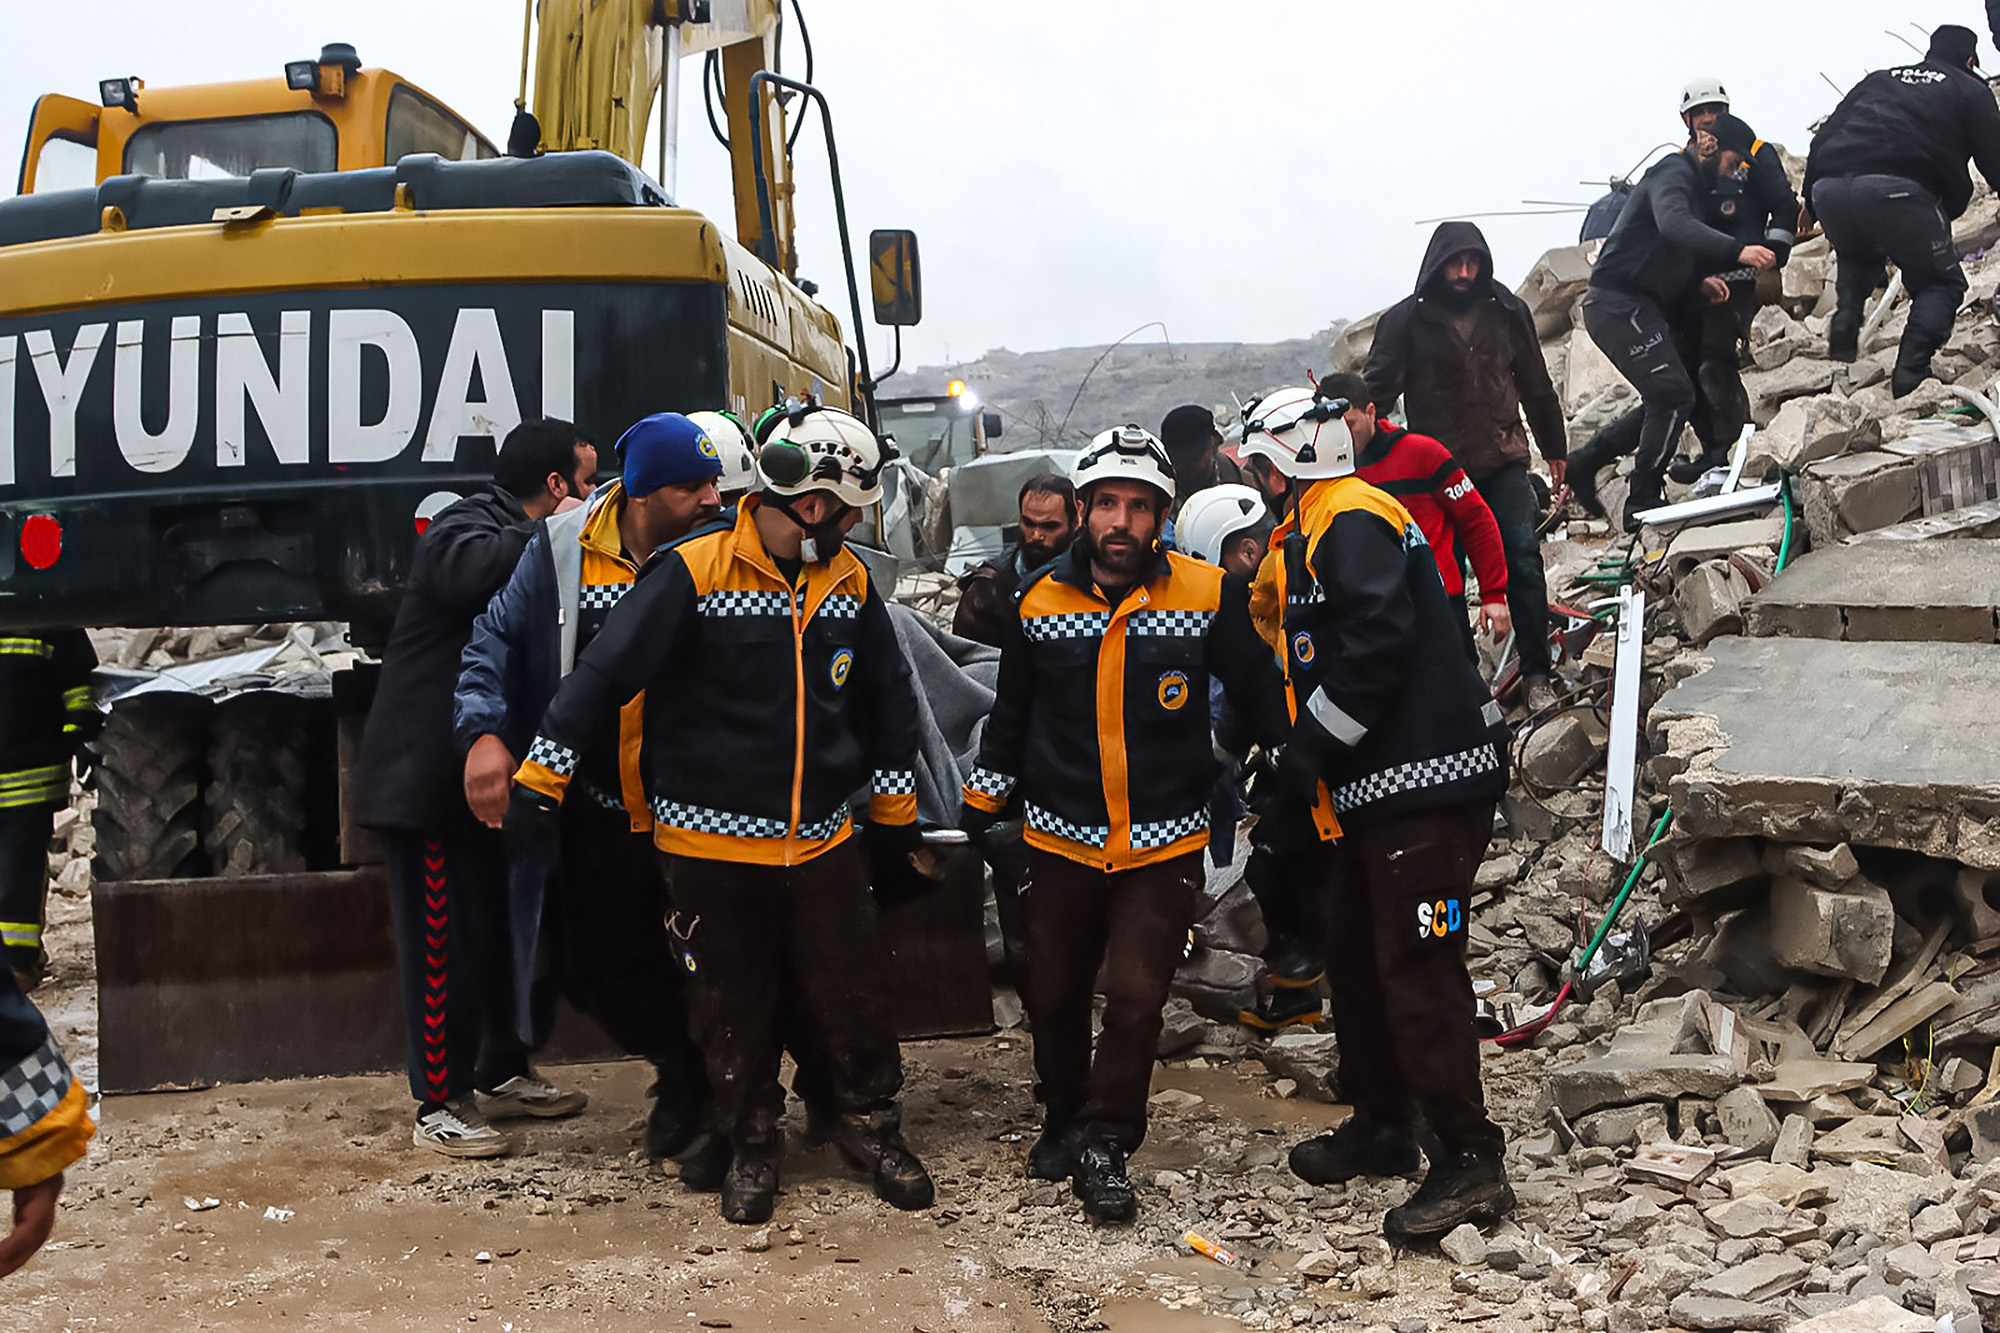 Rescue teams evacuate a victim pulled out of the rubble following an earthquake in Idlib, Syria, on February 6.